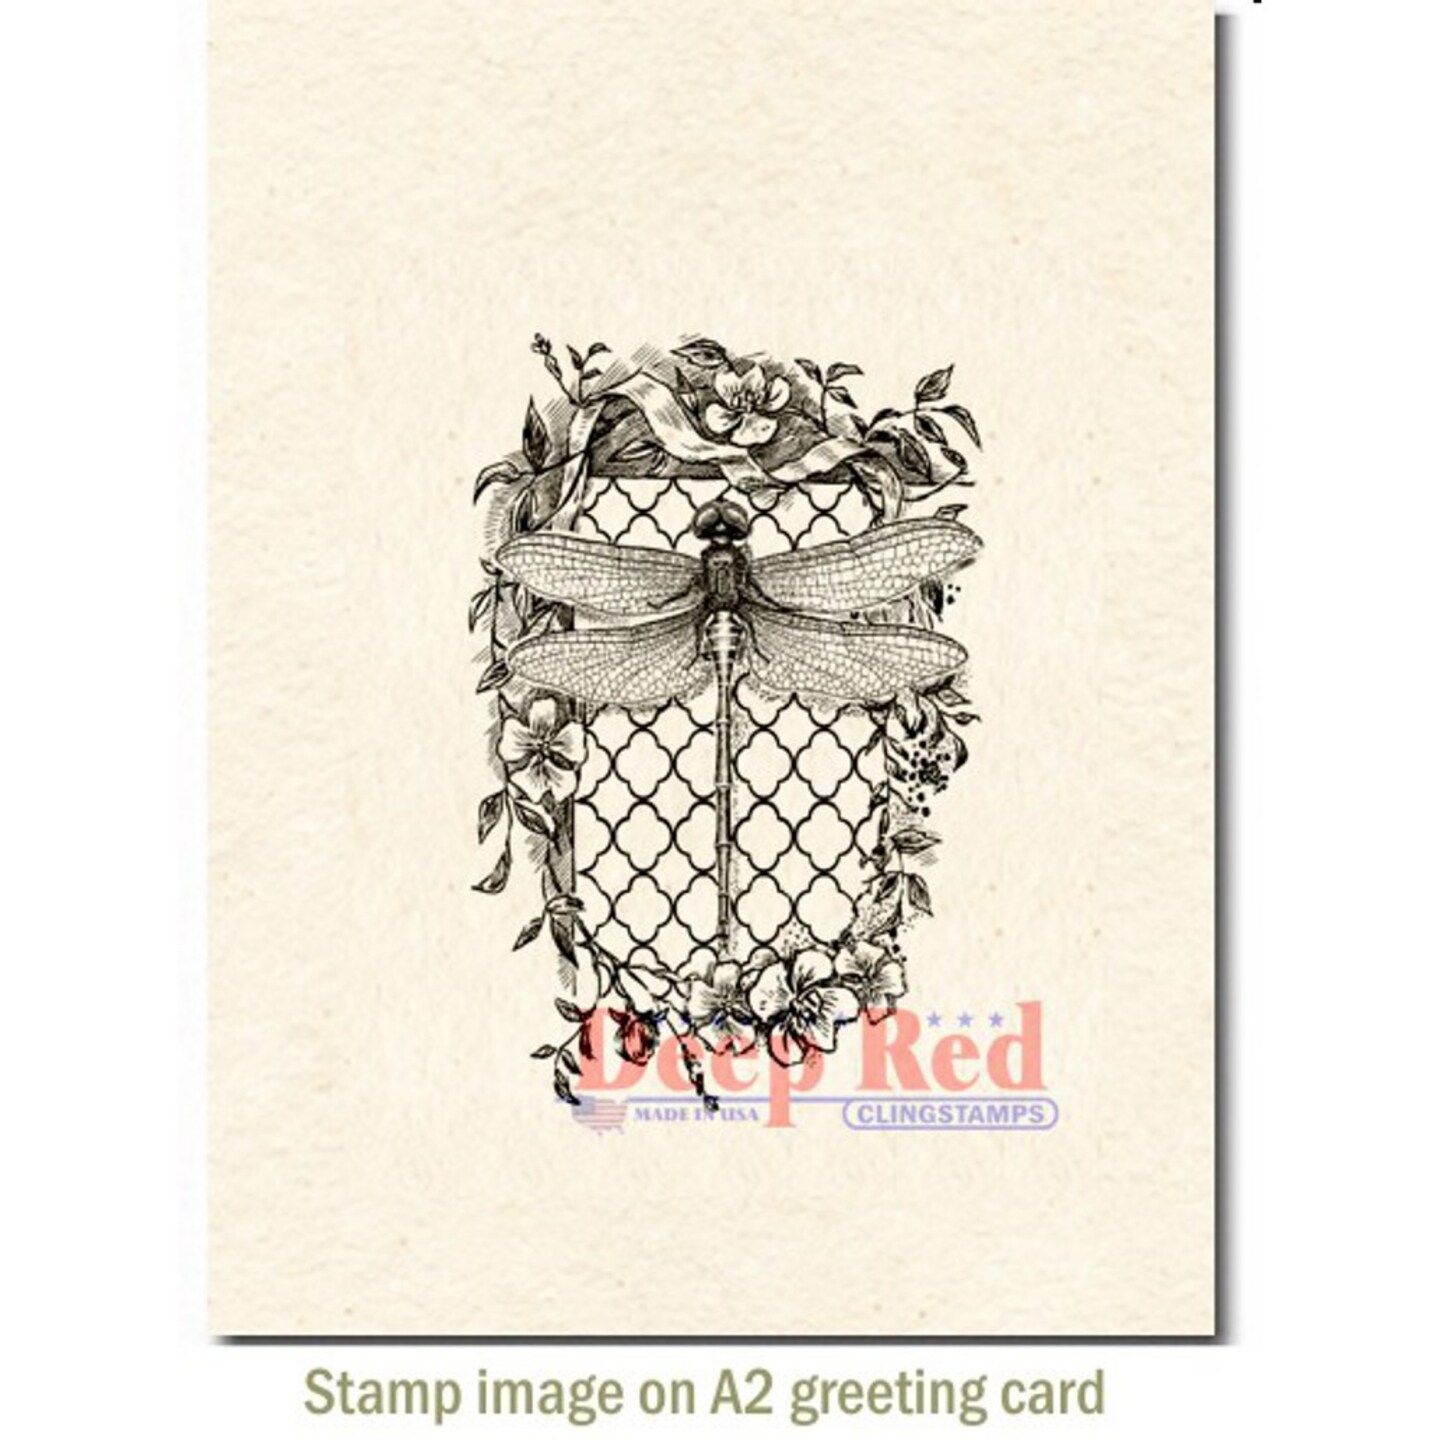 Deep Red Stamps Dragonfly Quatrefoil Rubber Cling Stamp 1.9 x 3.1 inches